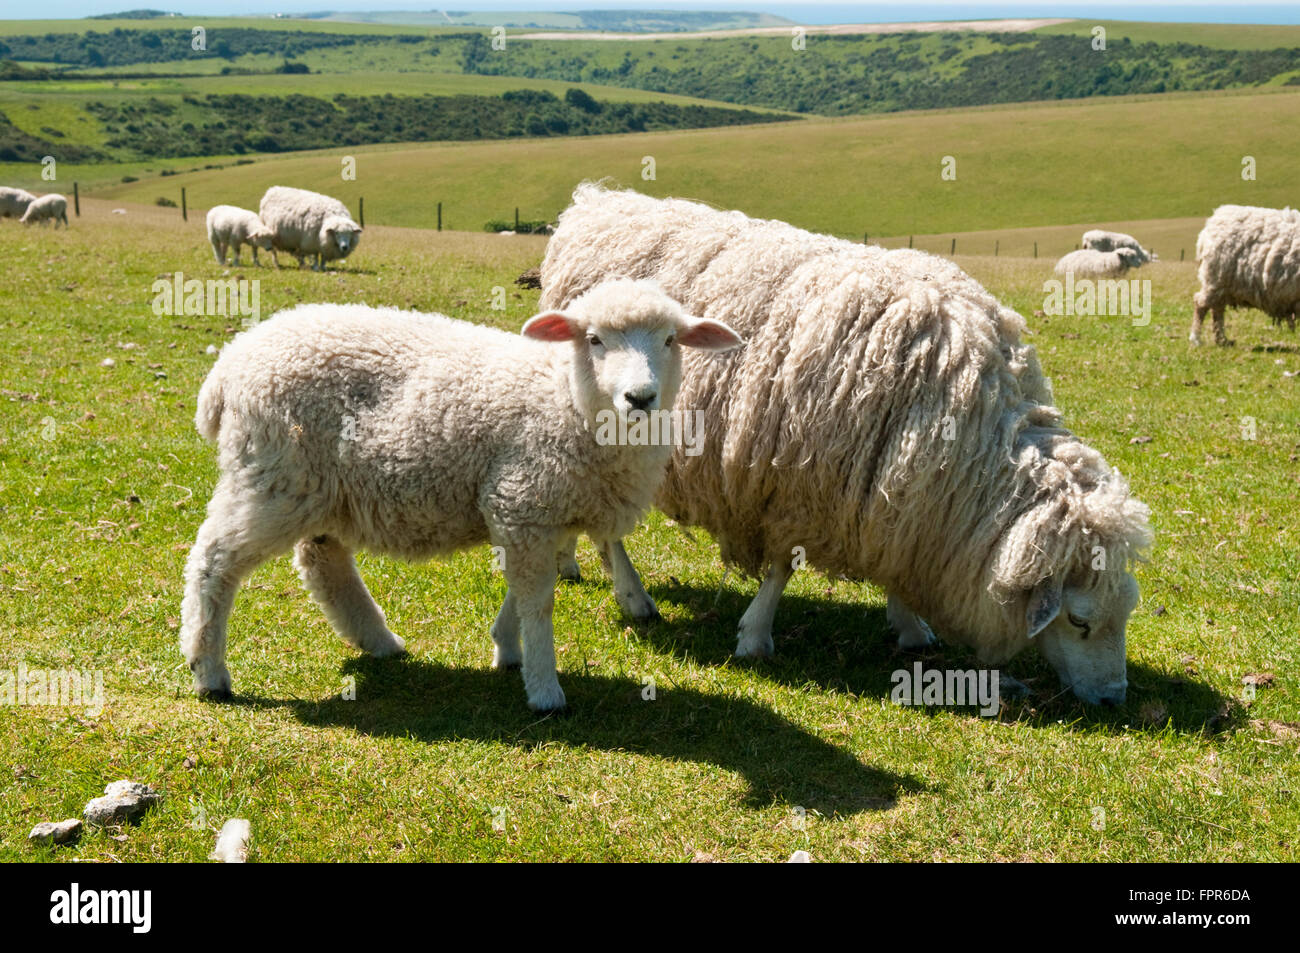 Sheep grazing in a field on the South Downs Way near Alfriston in East Sussex, England Stock Photo